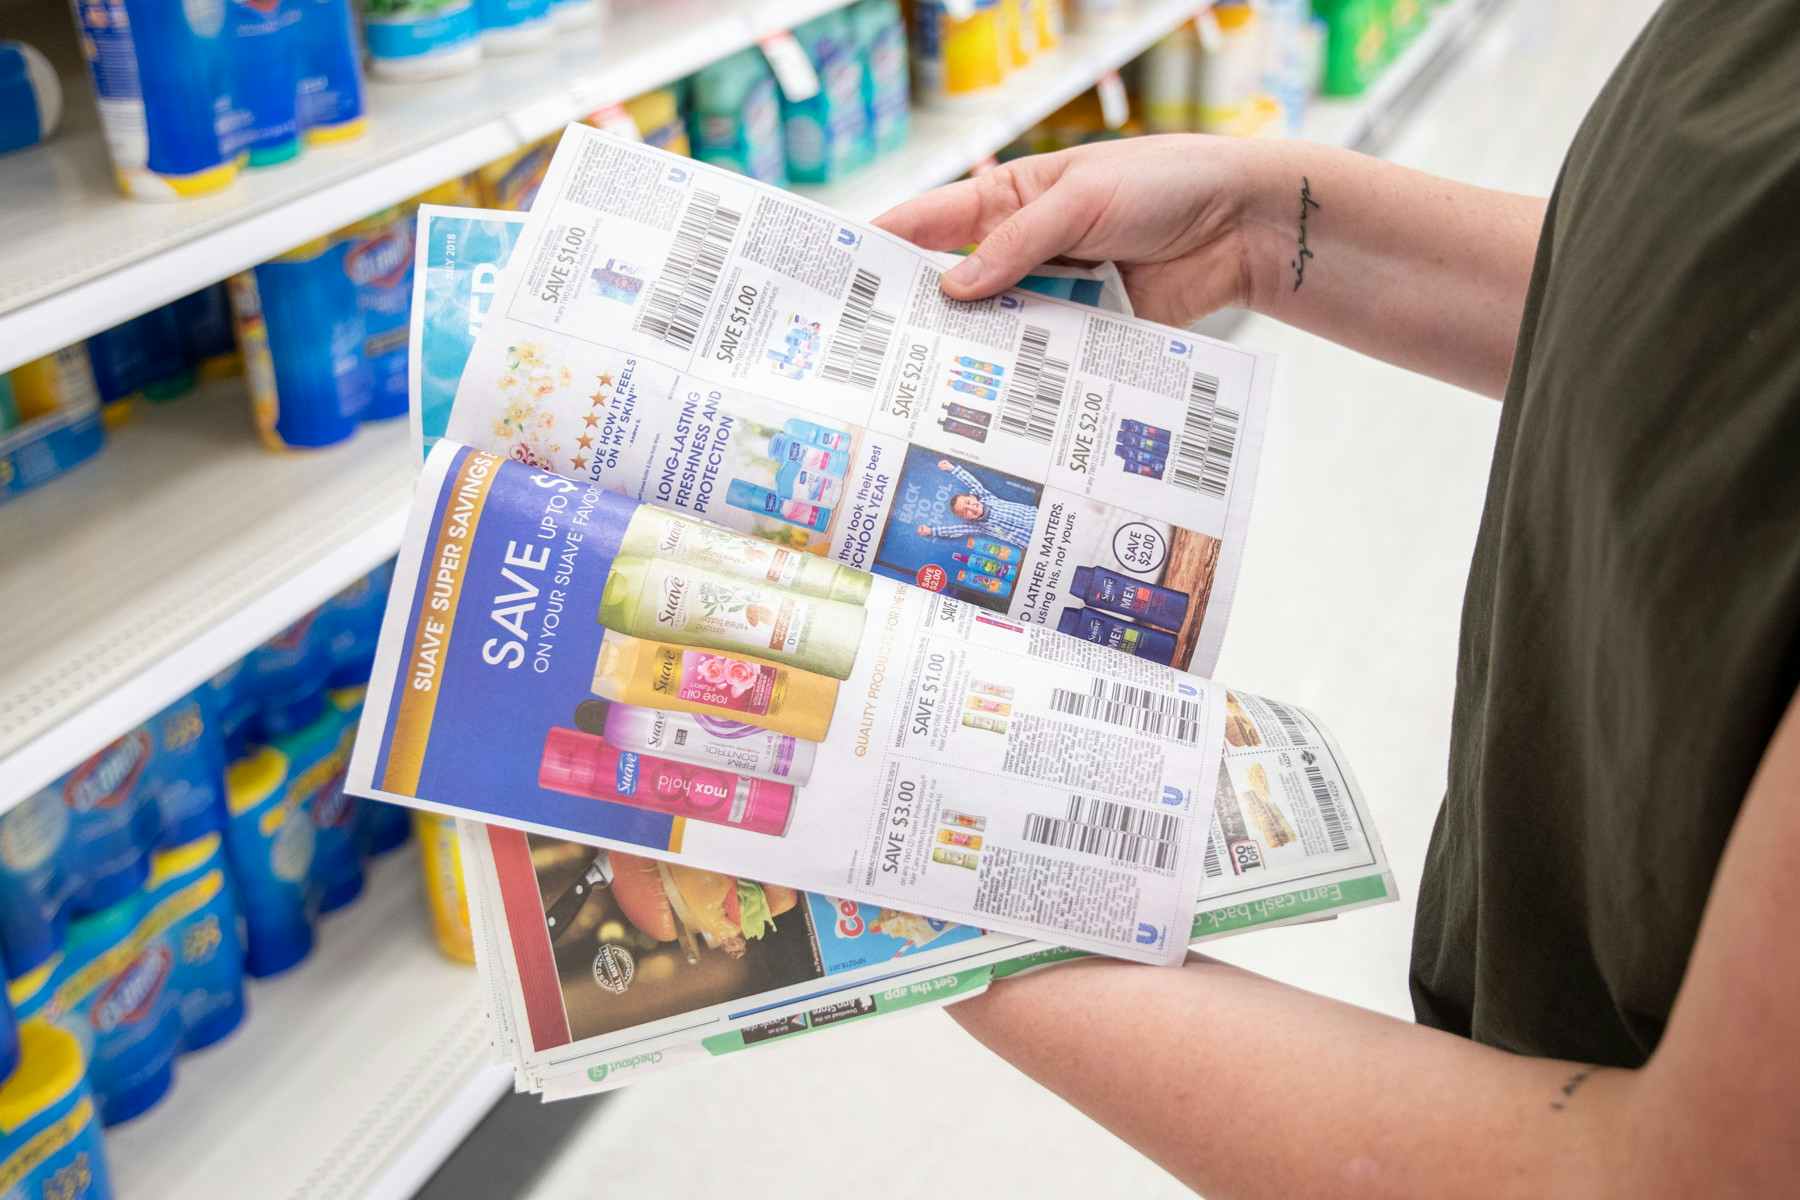 A person flipping through newspaper coupons while standing in a store aisle.